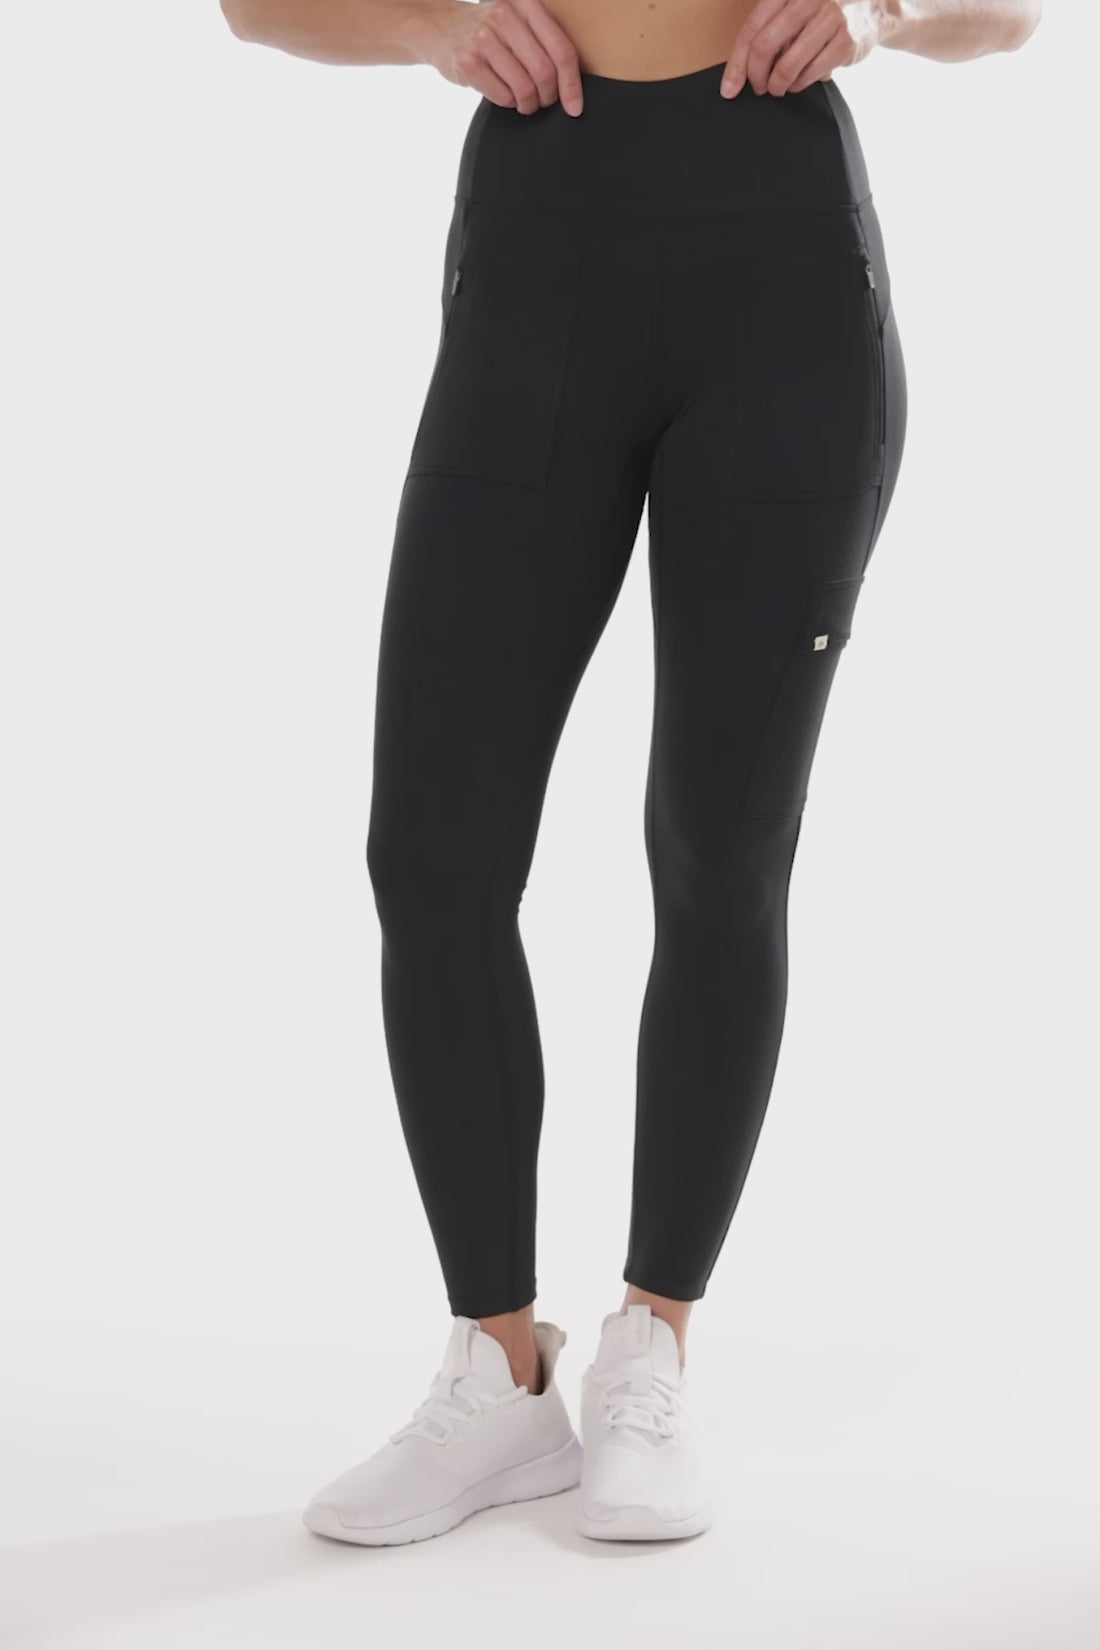 Fabletics Define High-Waisted 7/8 Legging Womens Dusty Teal